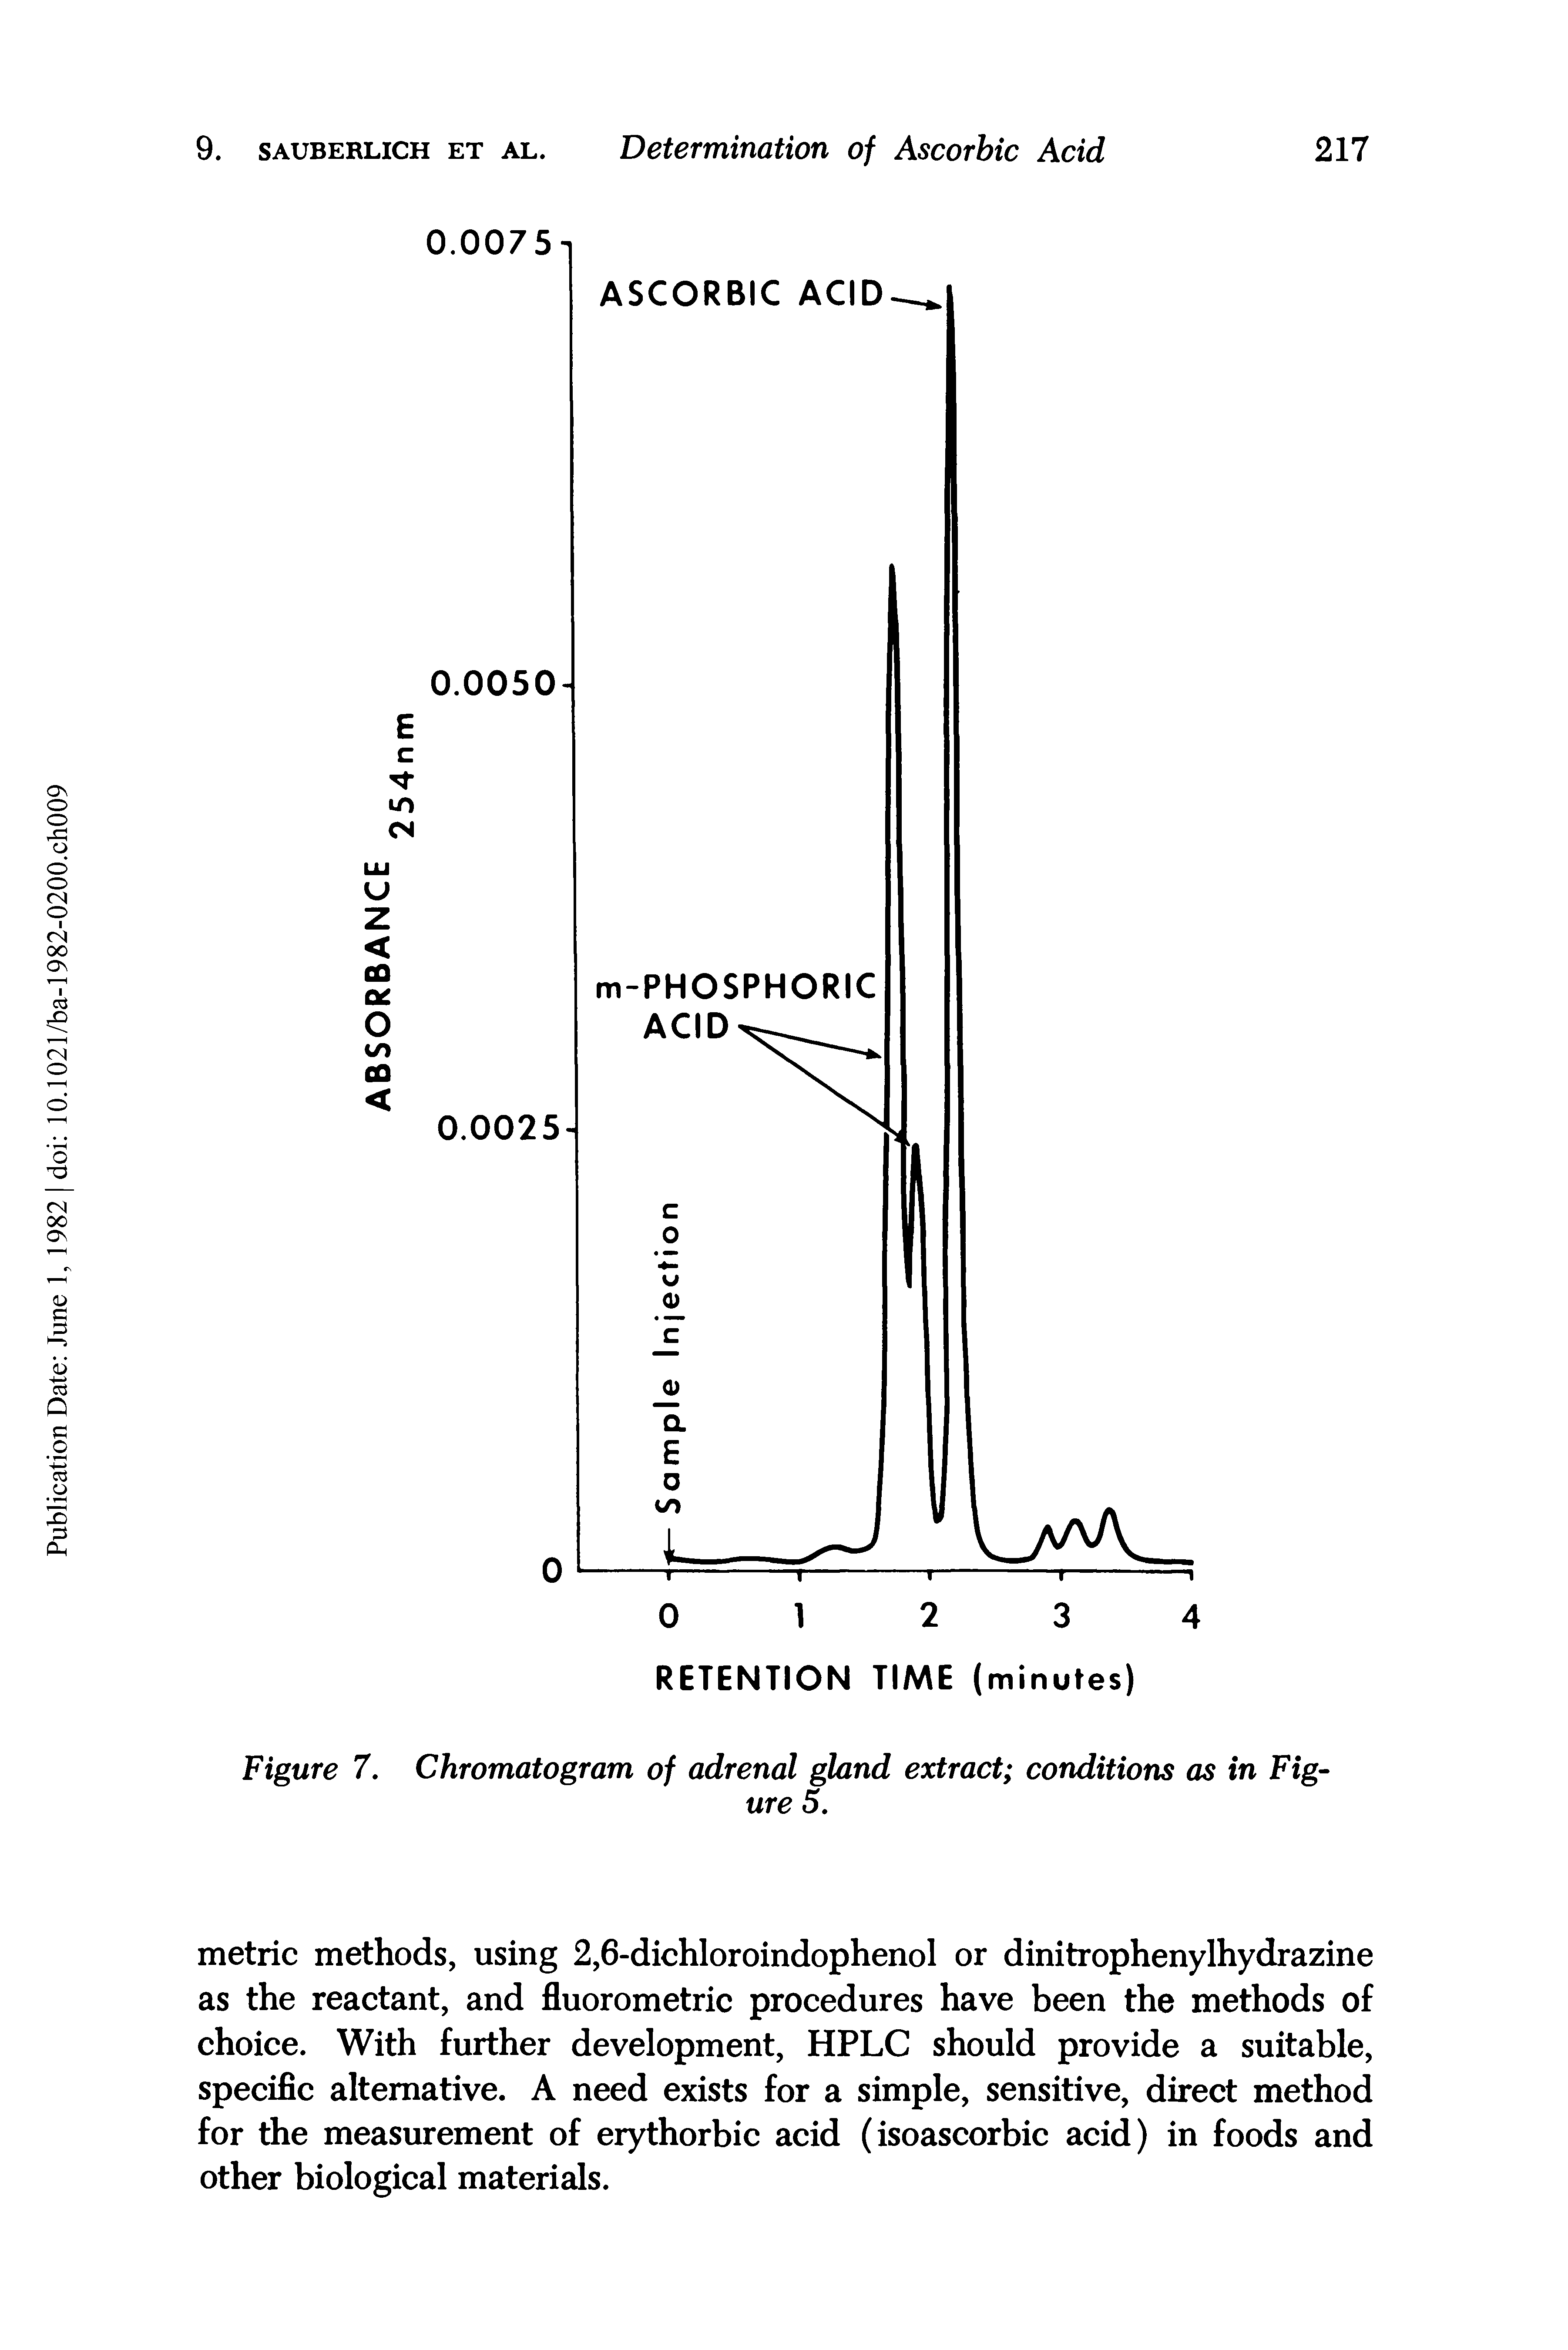 Figure 7. Chromatogram of adrenal gland extract conditions as in Figure 5.